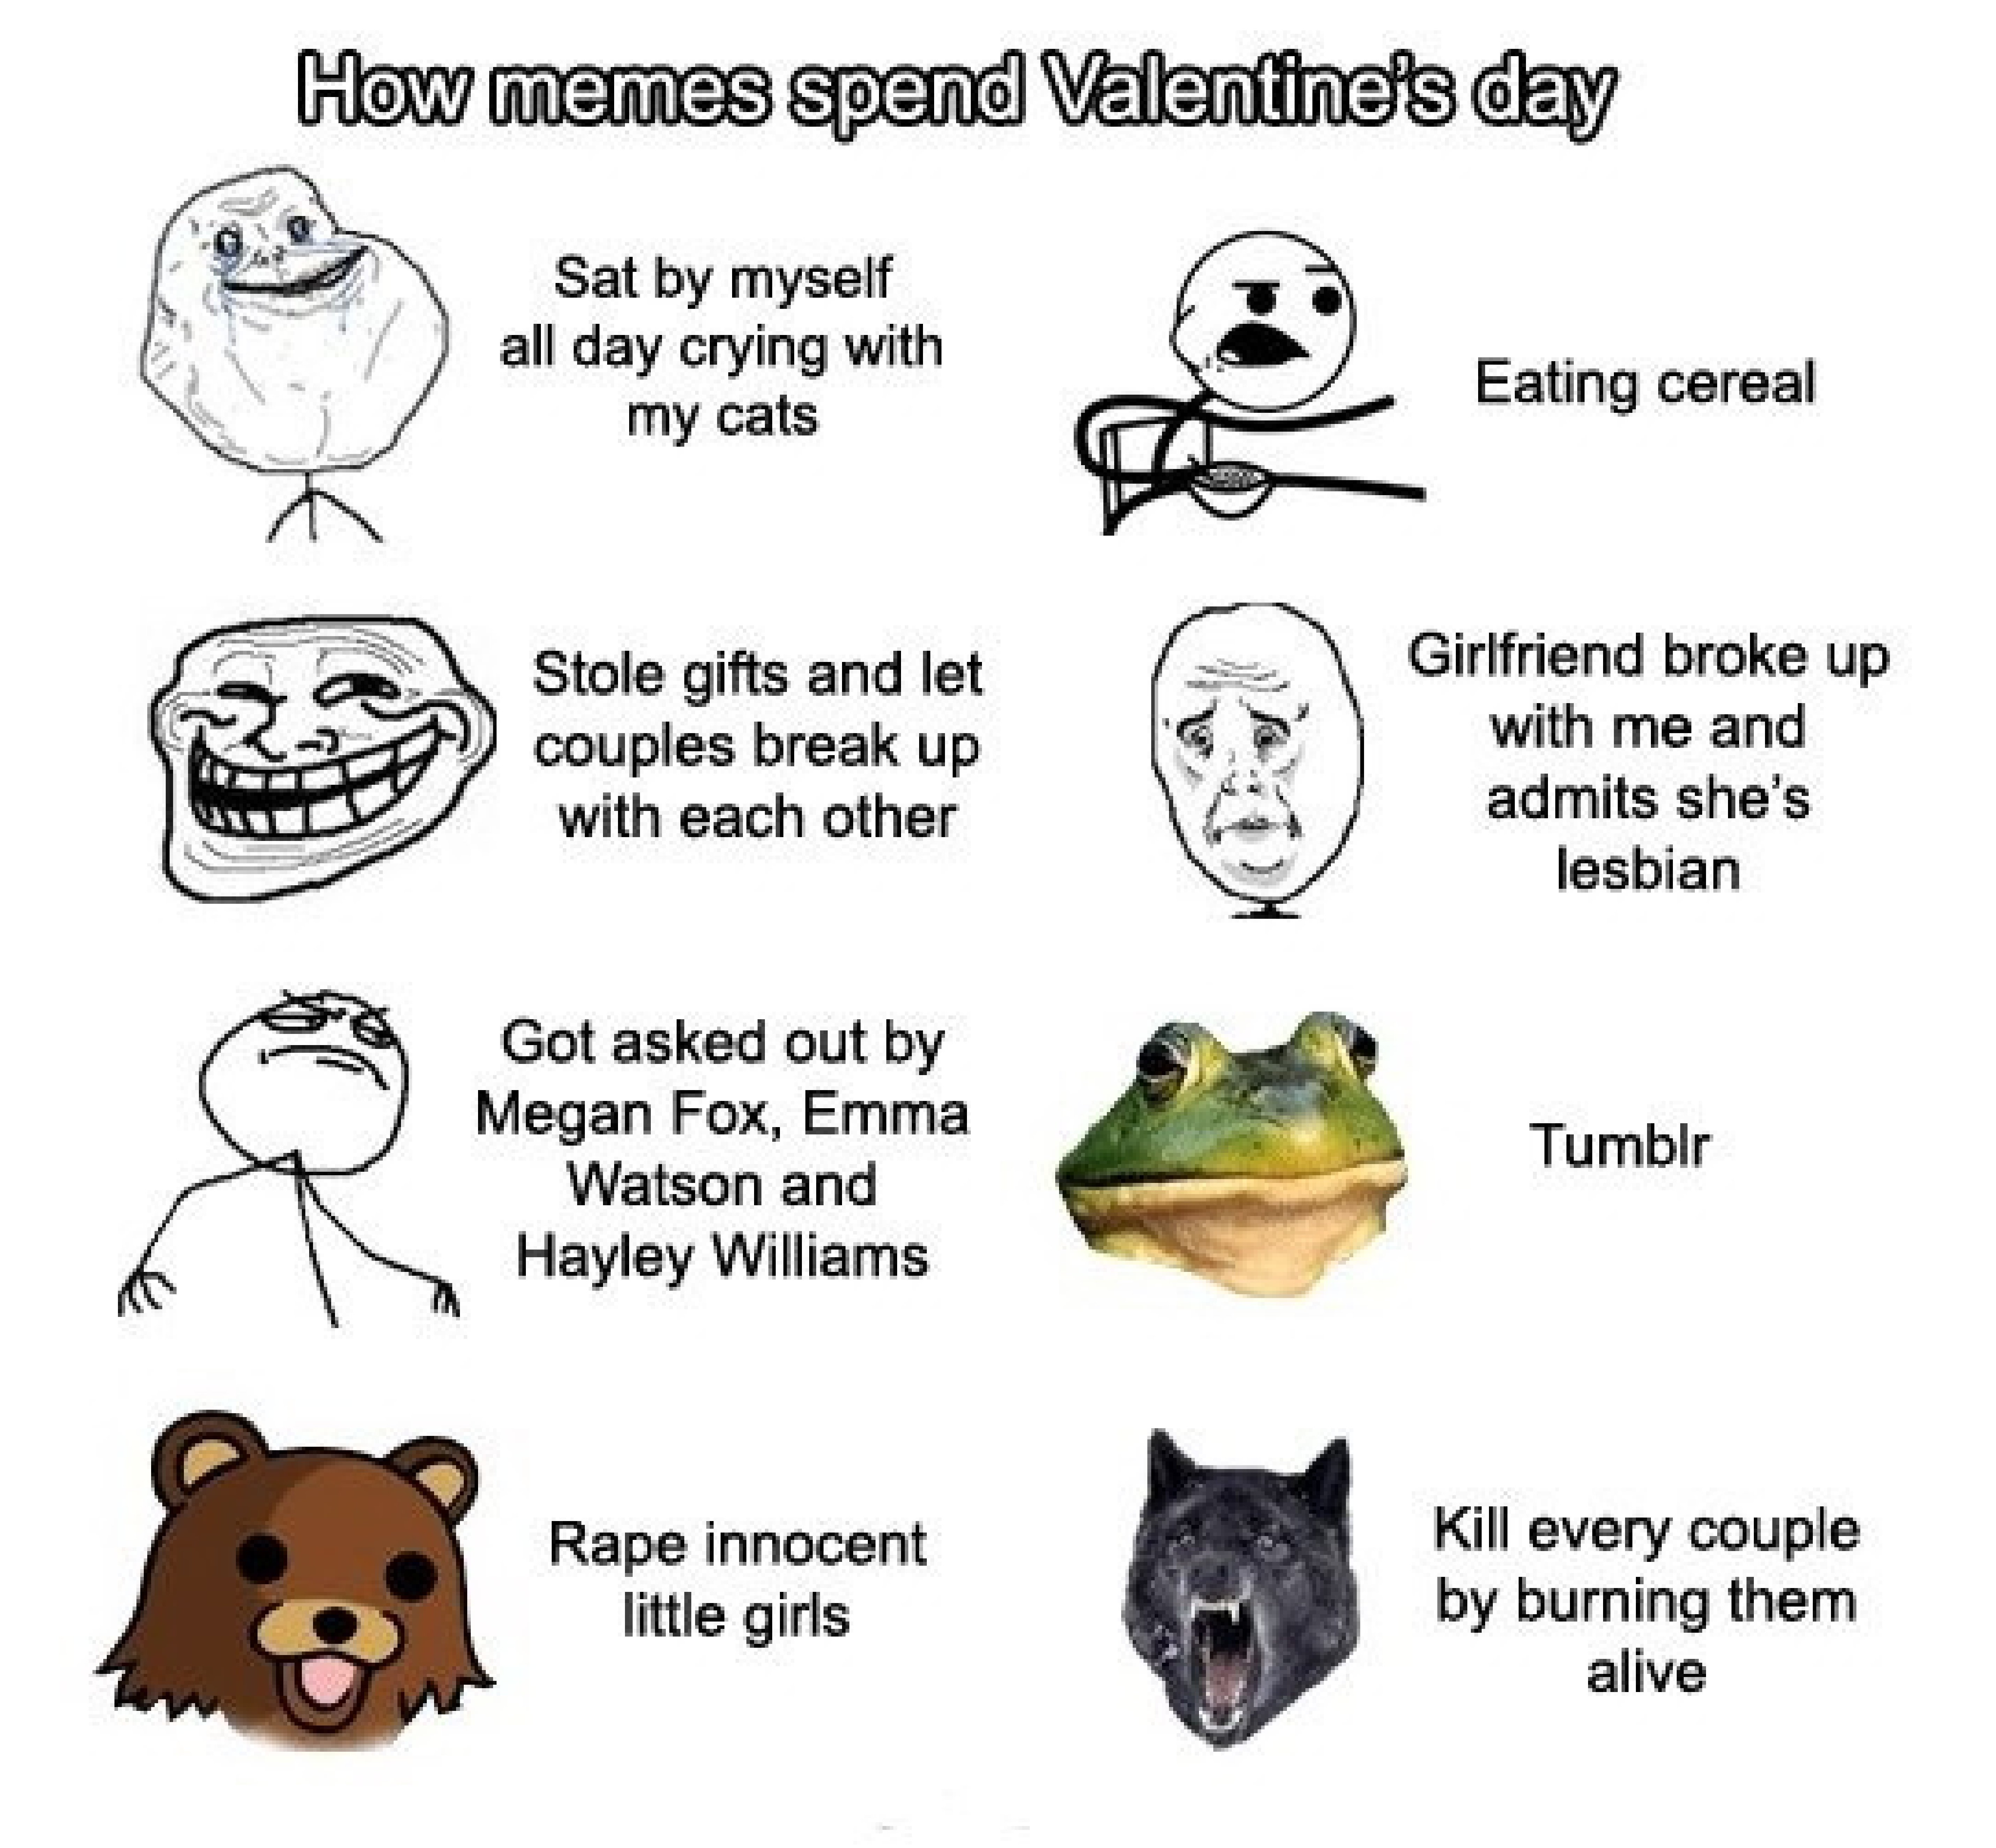 How memes spend Valentine's Day5720 x 5296